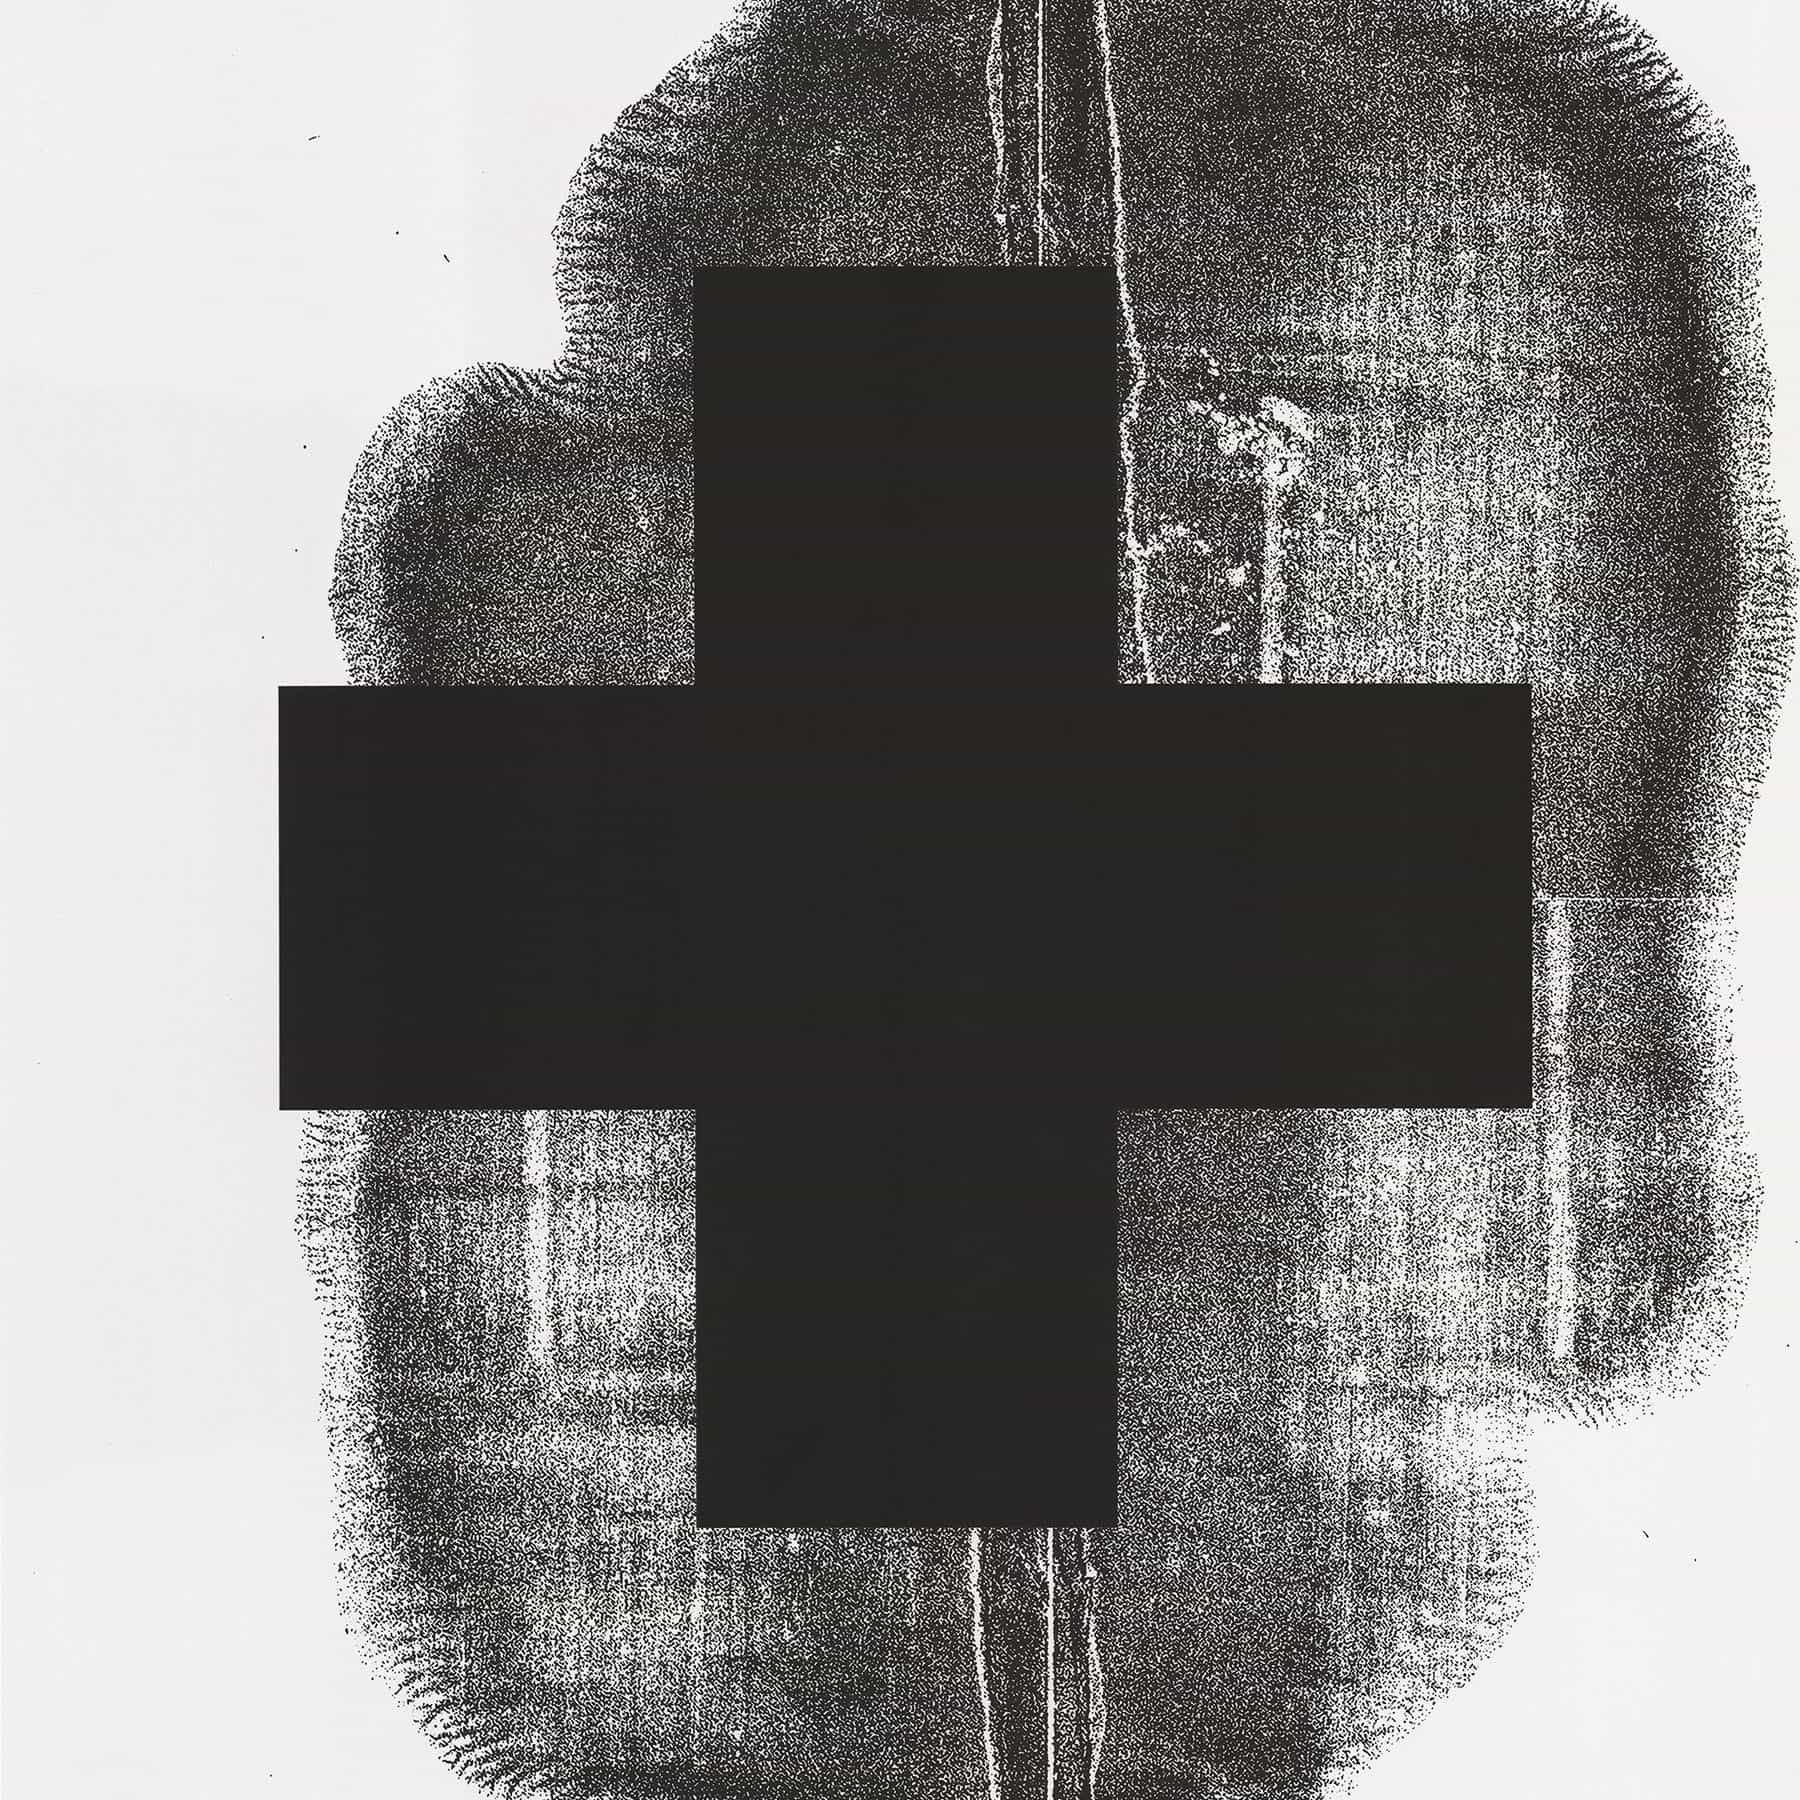 Christopher Wool Limited Edition for The Kitchen